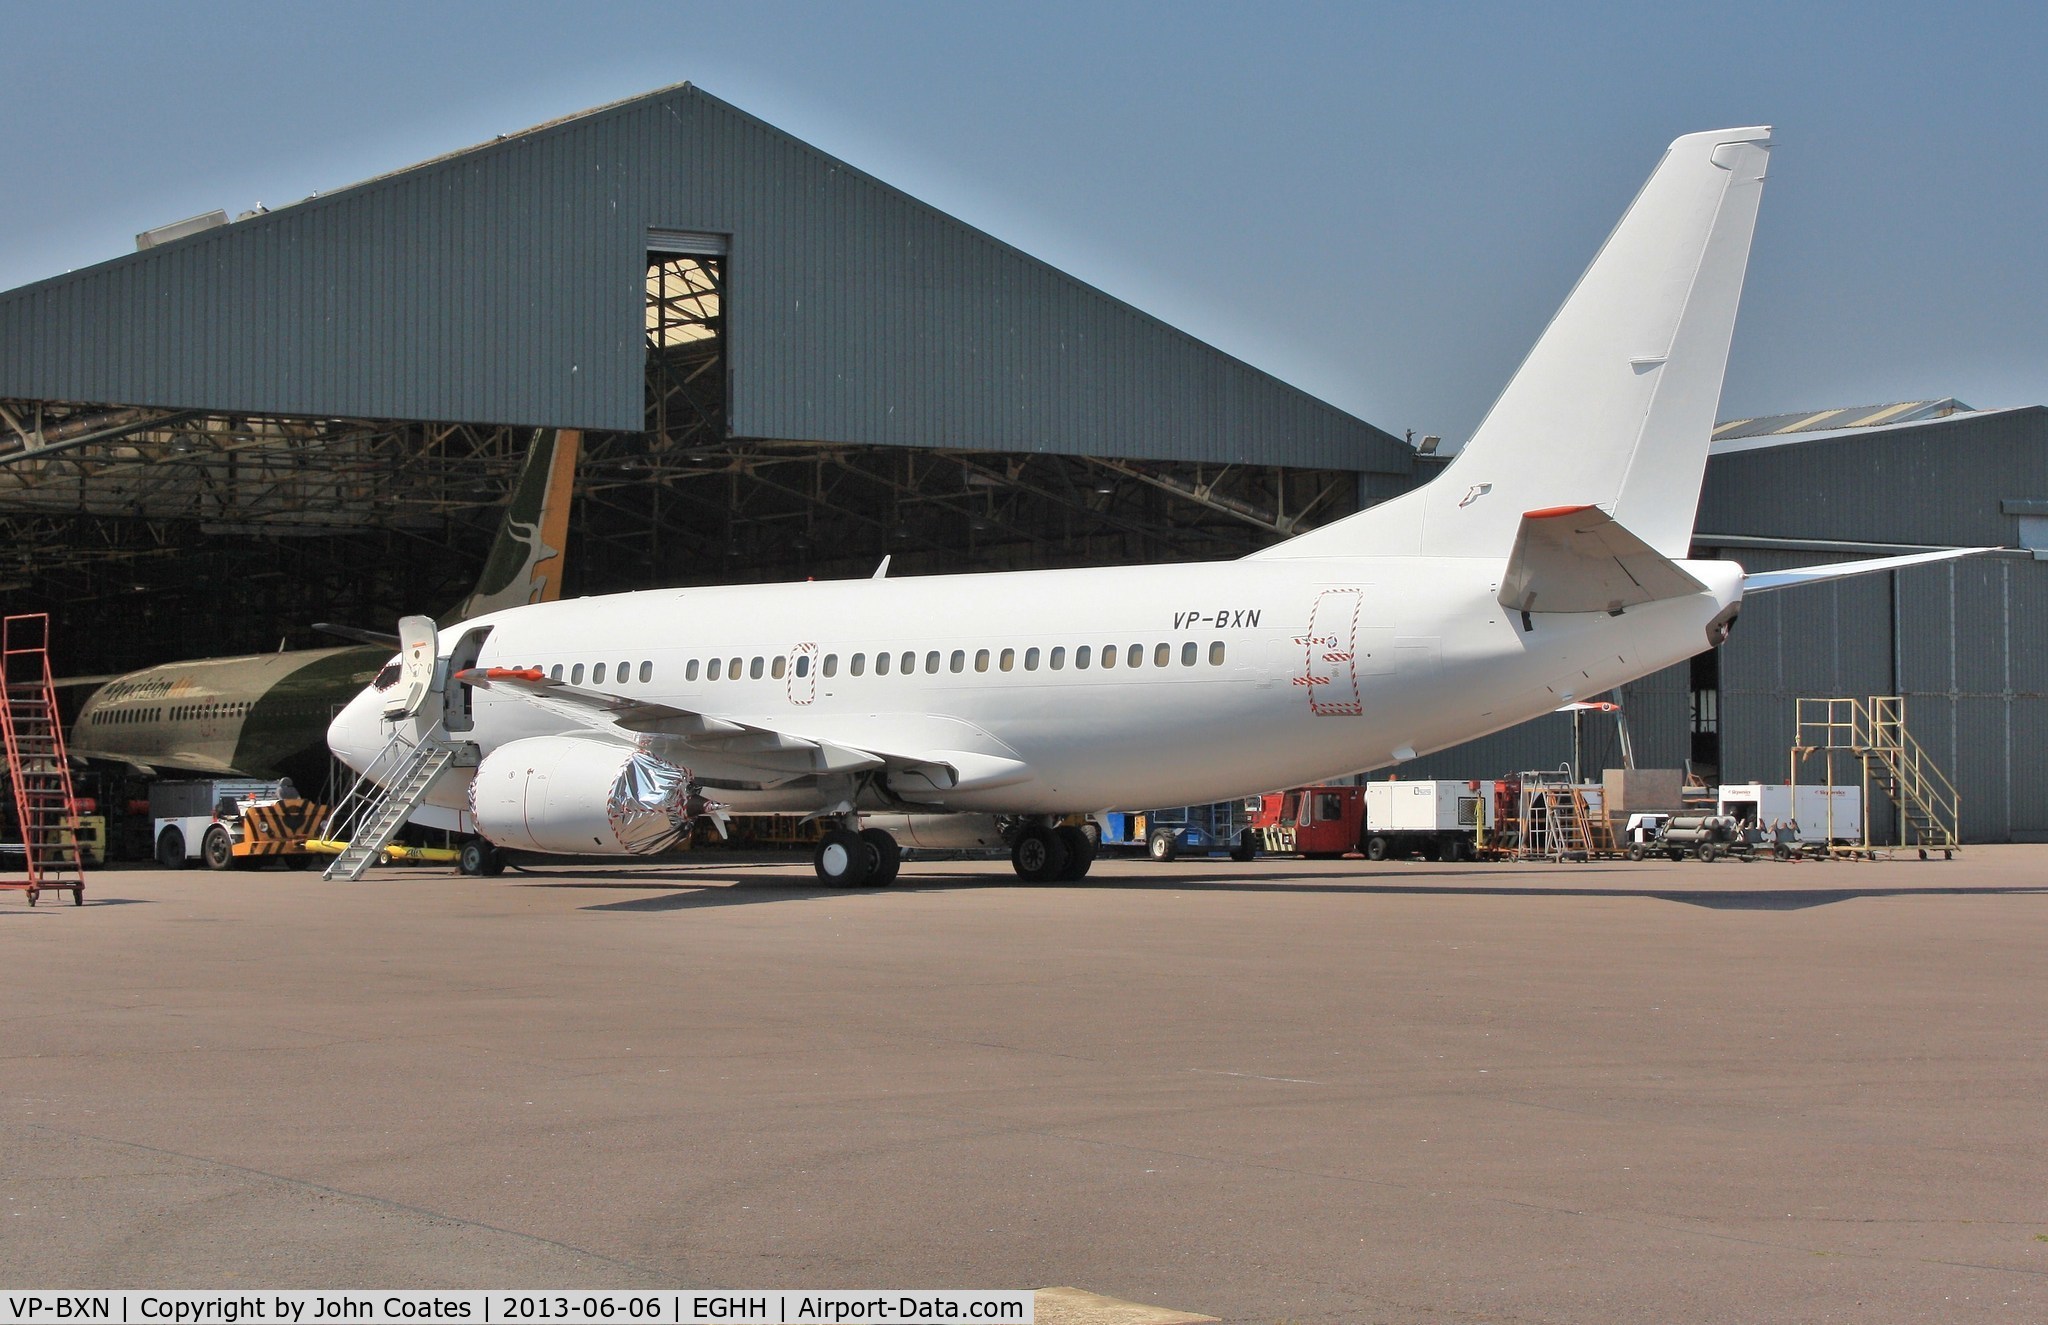 VP-BXN, 1990 Boeing 737-53A C/N 24754, Just painted all white at European Aviation